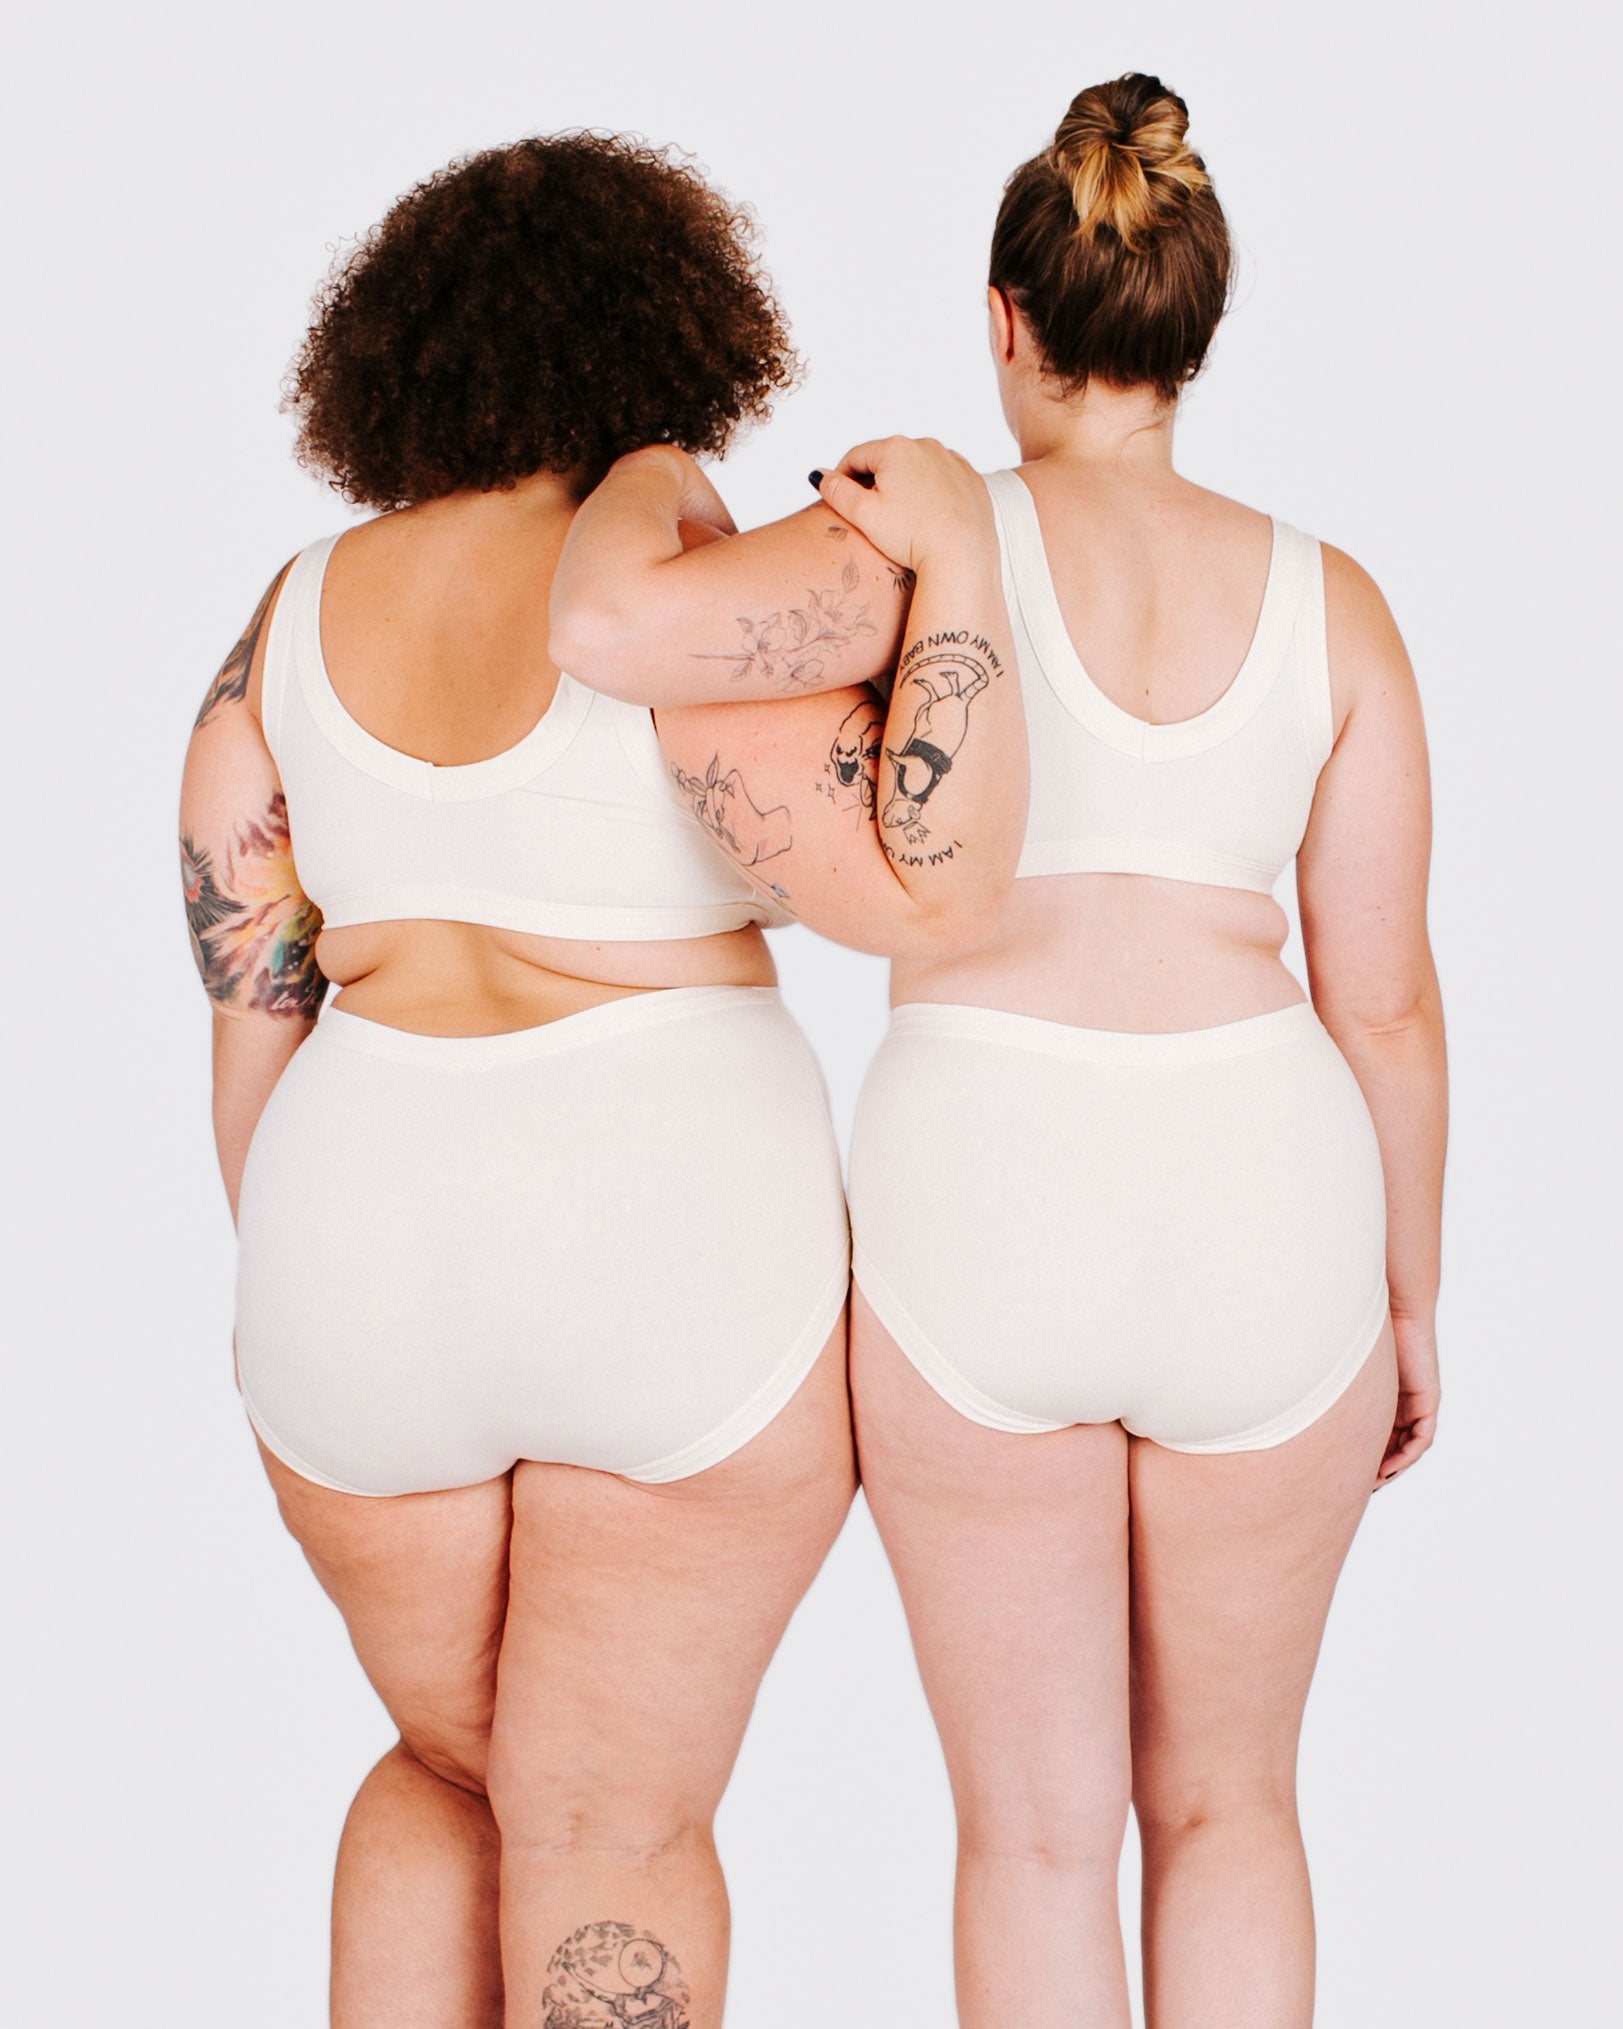 Fit photo from the back of Thunderpants organic cotton Original style underwear and Bralette in off-white on two models standing together.